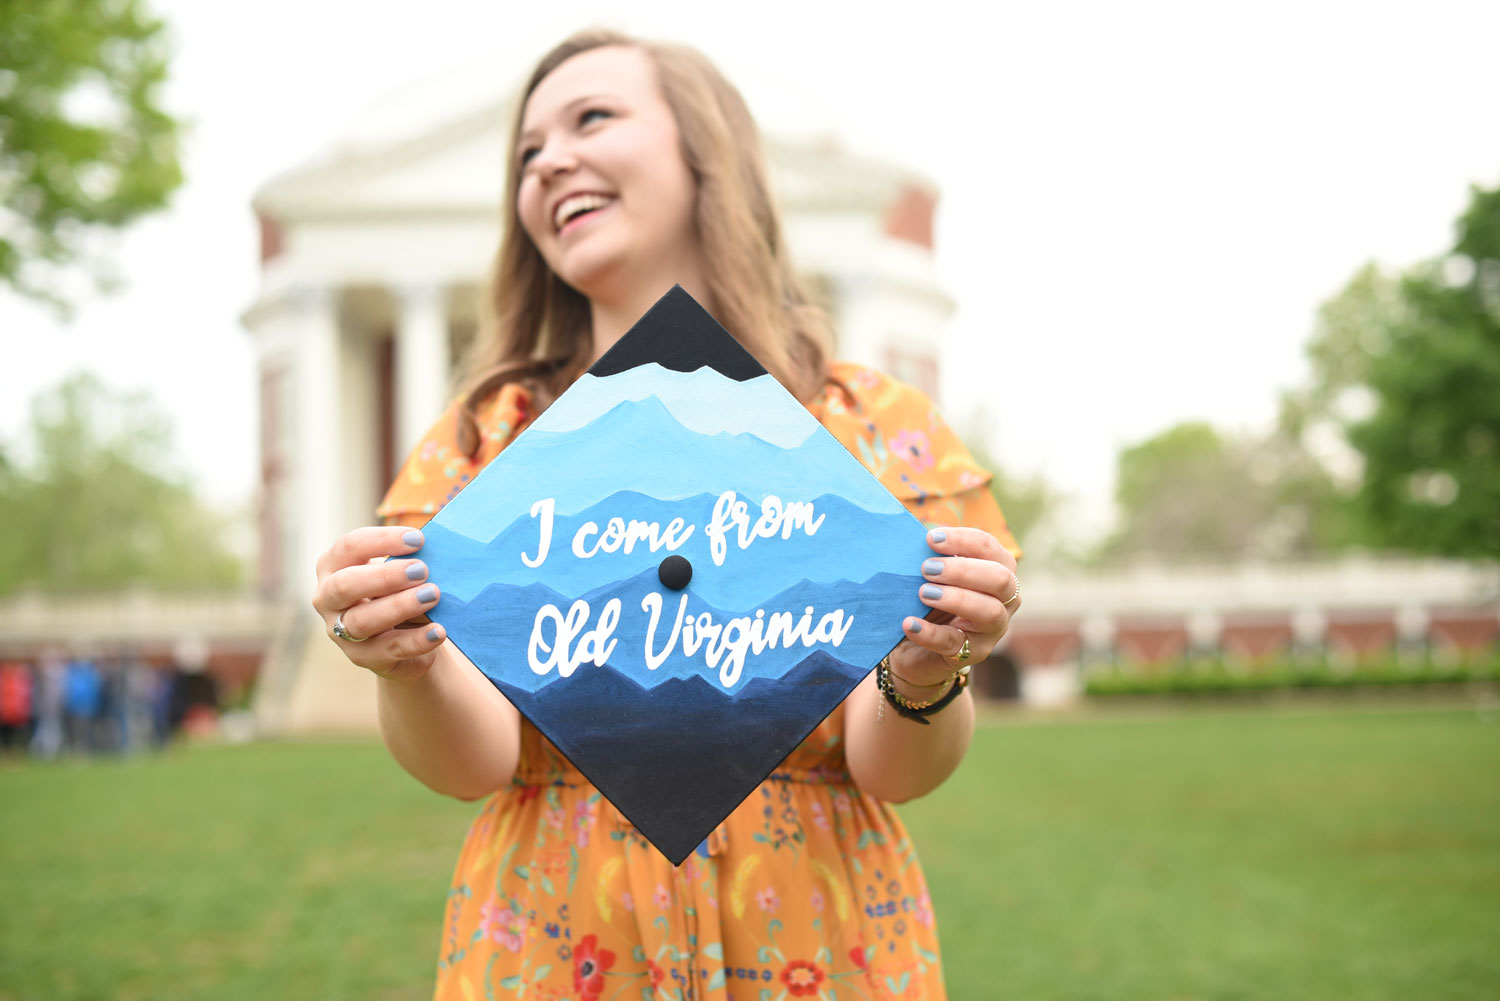 Nicole Bakers cap featured the Blue ridge mountains with the text, I come from Old Virginia